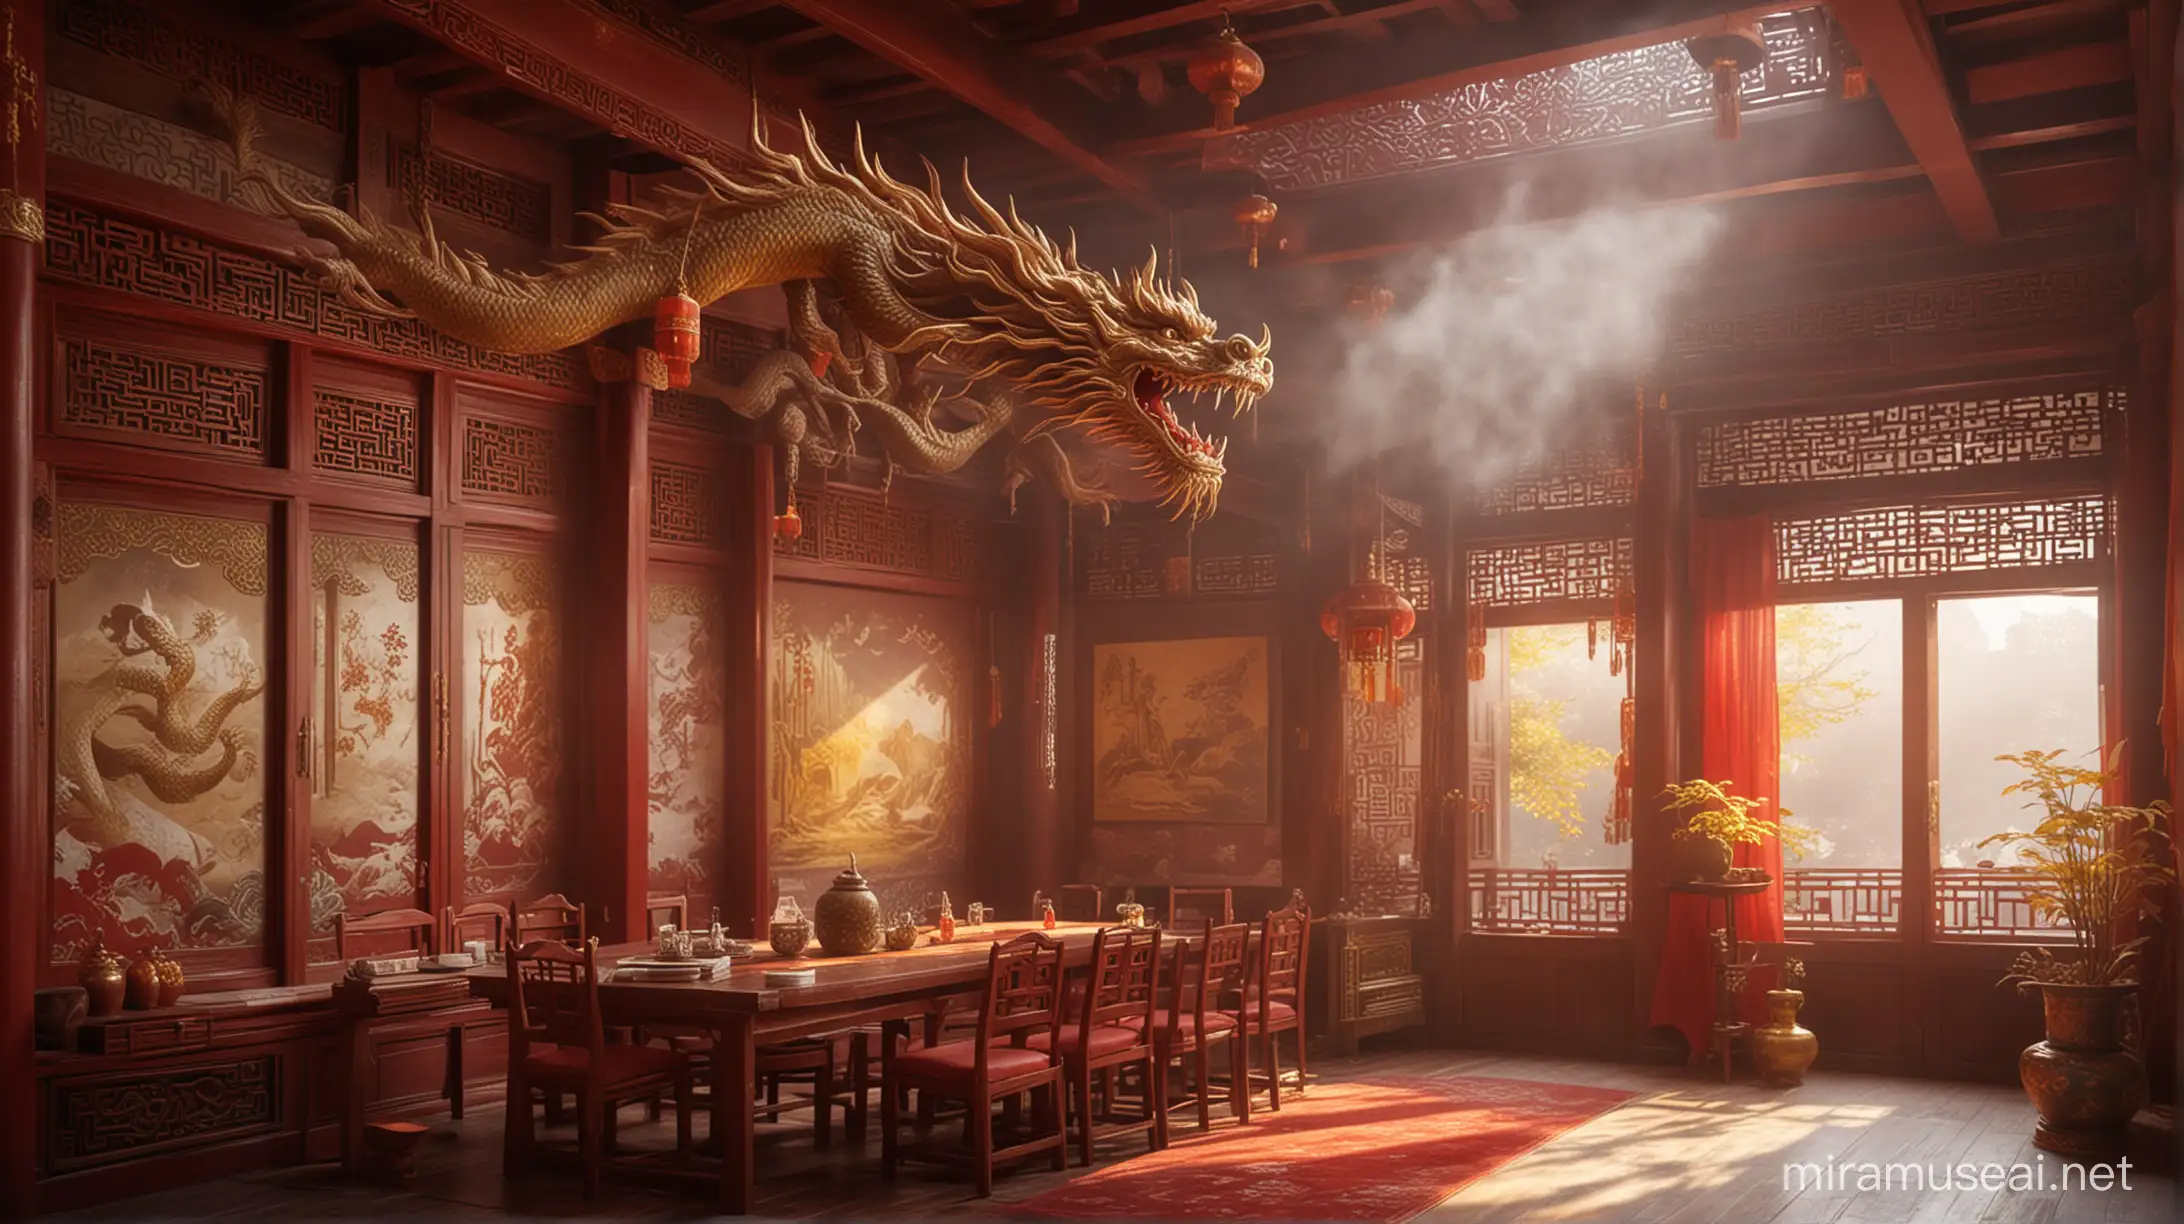 Ancient Chinese Fantasy Interior with Mythical Dragon